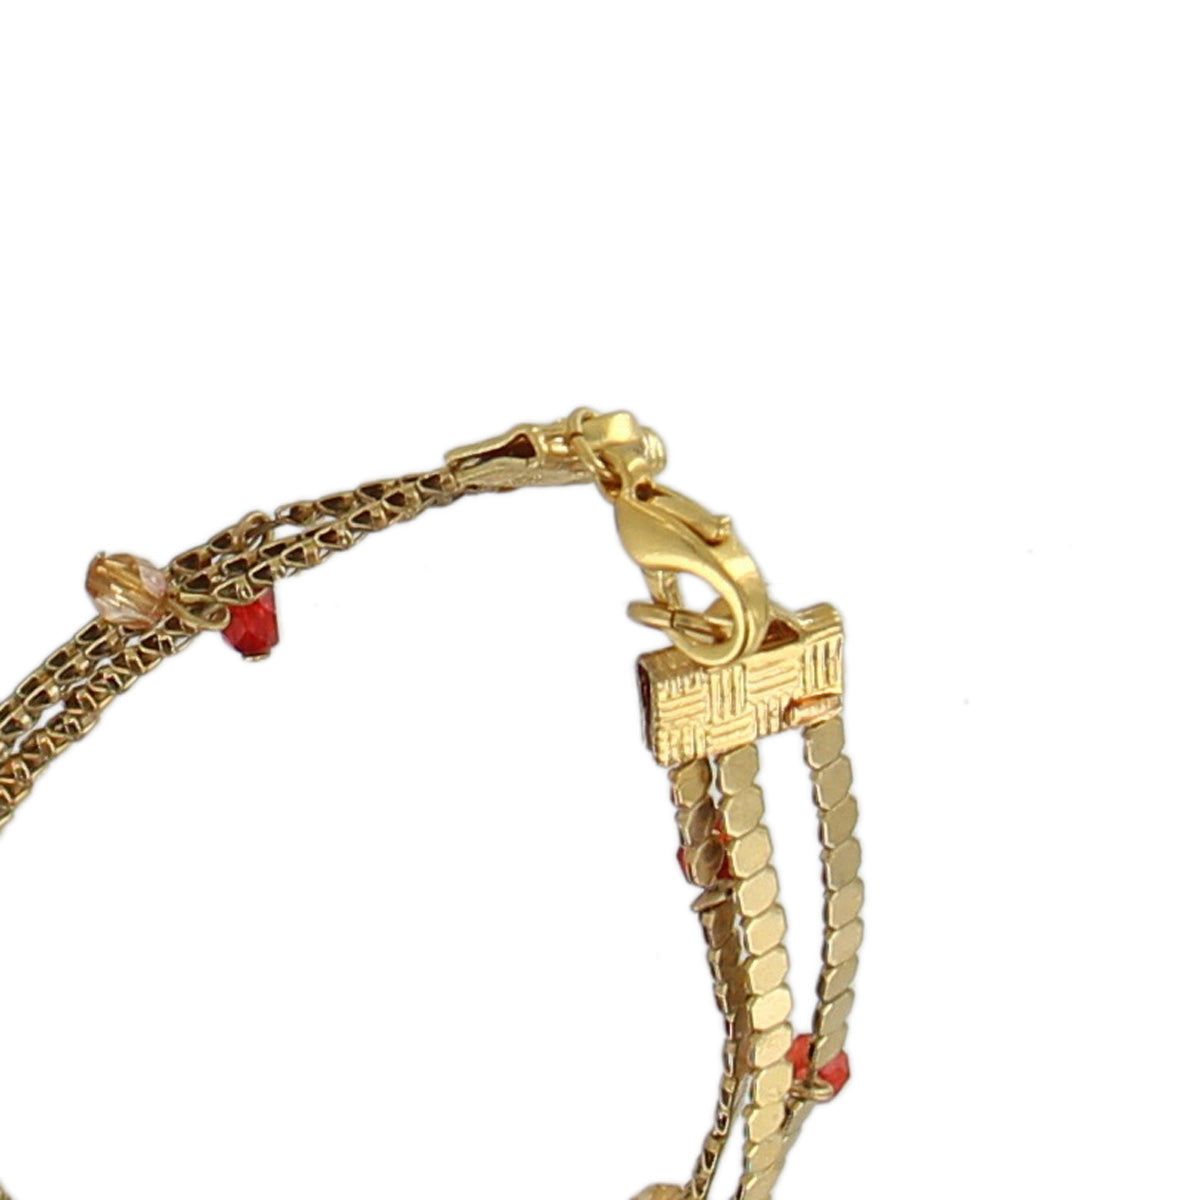 Multi Strand Gold Tone Red Beaded Chain Bracelet Back To School Jewelry 6"